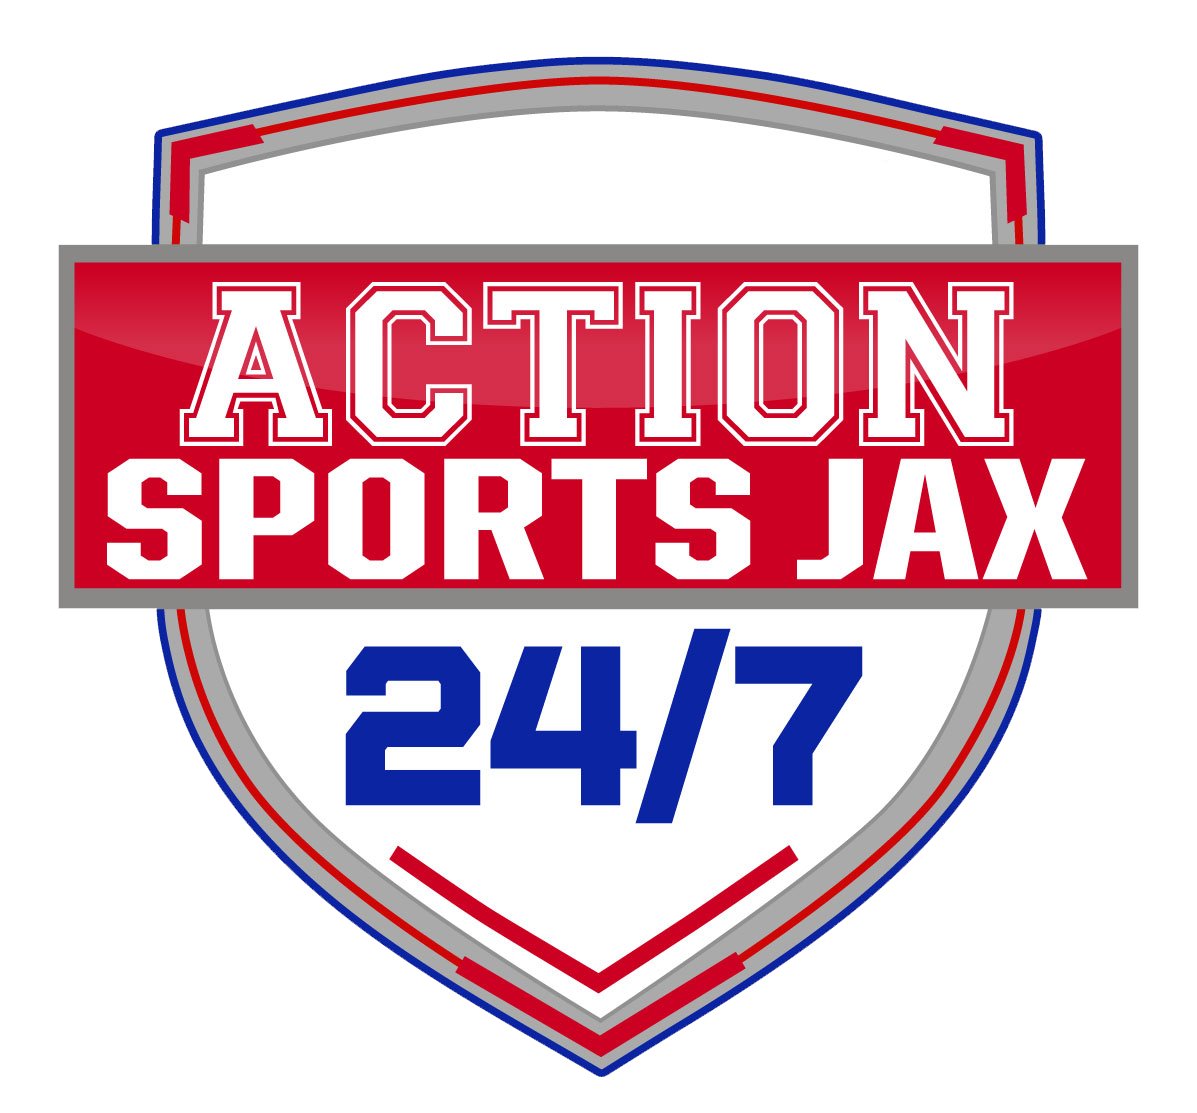 🚨 Big News Alert! Introducing Action Sports Jax 24/7, Jacksonville's first-ever streaming sports channel! Tune in to 'Brent and Austen' live weekdays from 10 a.m. - 1 p.m. ET. Available on the Action News Jax Now app! #WeAreCMG